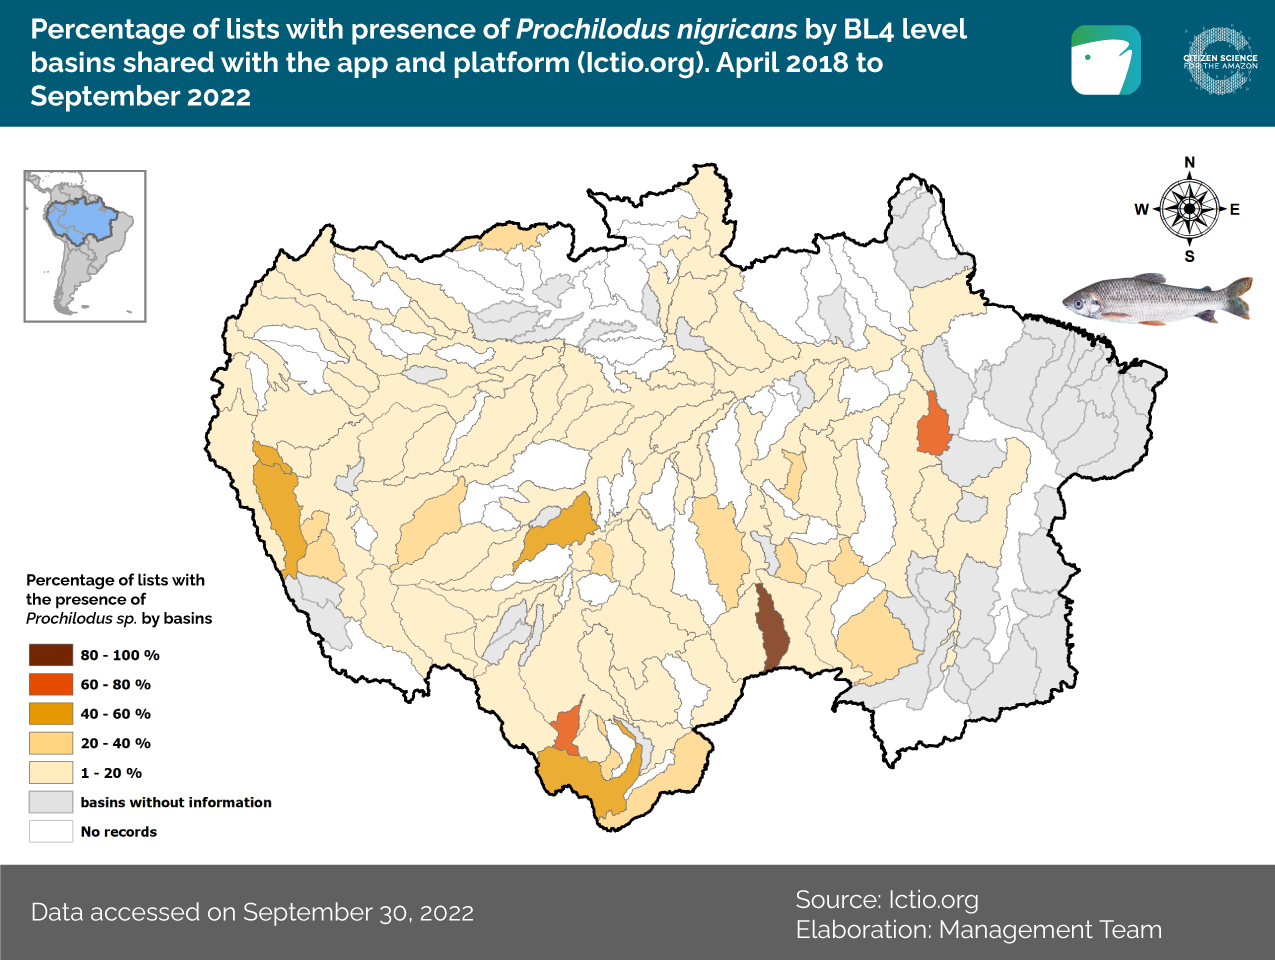 Percentage of listings in the app and web platform with presence of Prochilodus sp. by BL4 level sub-basins. Data for the period April 2018 to September 2022, accessed on 1 October 2022.